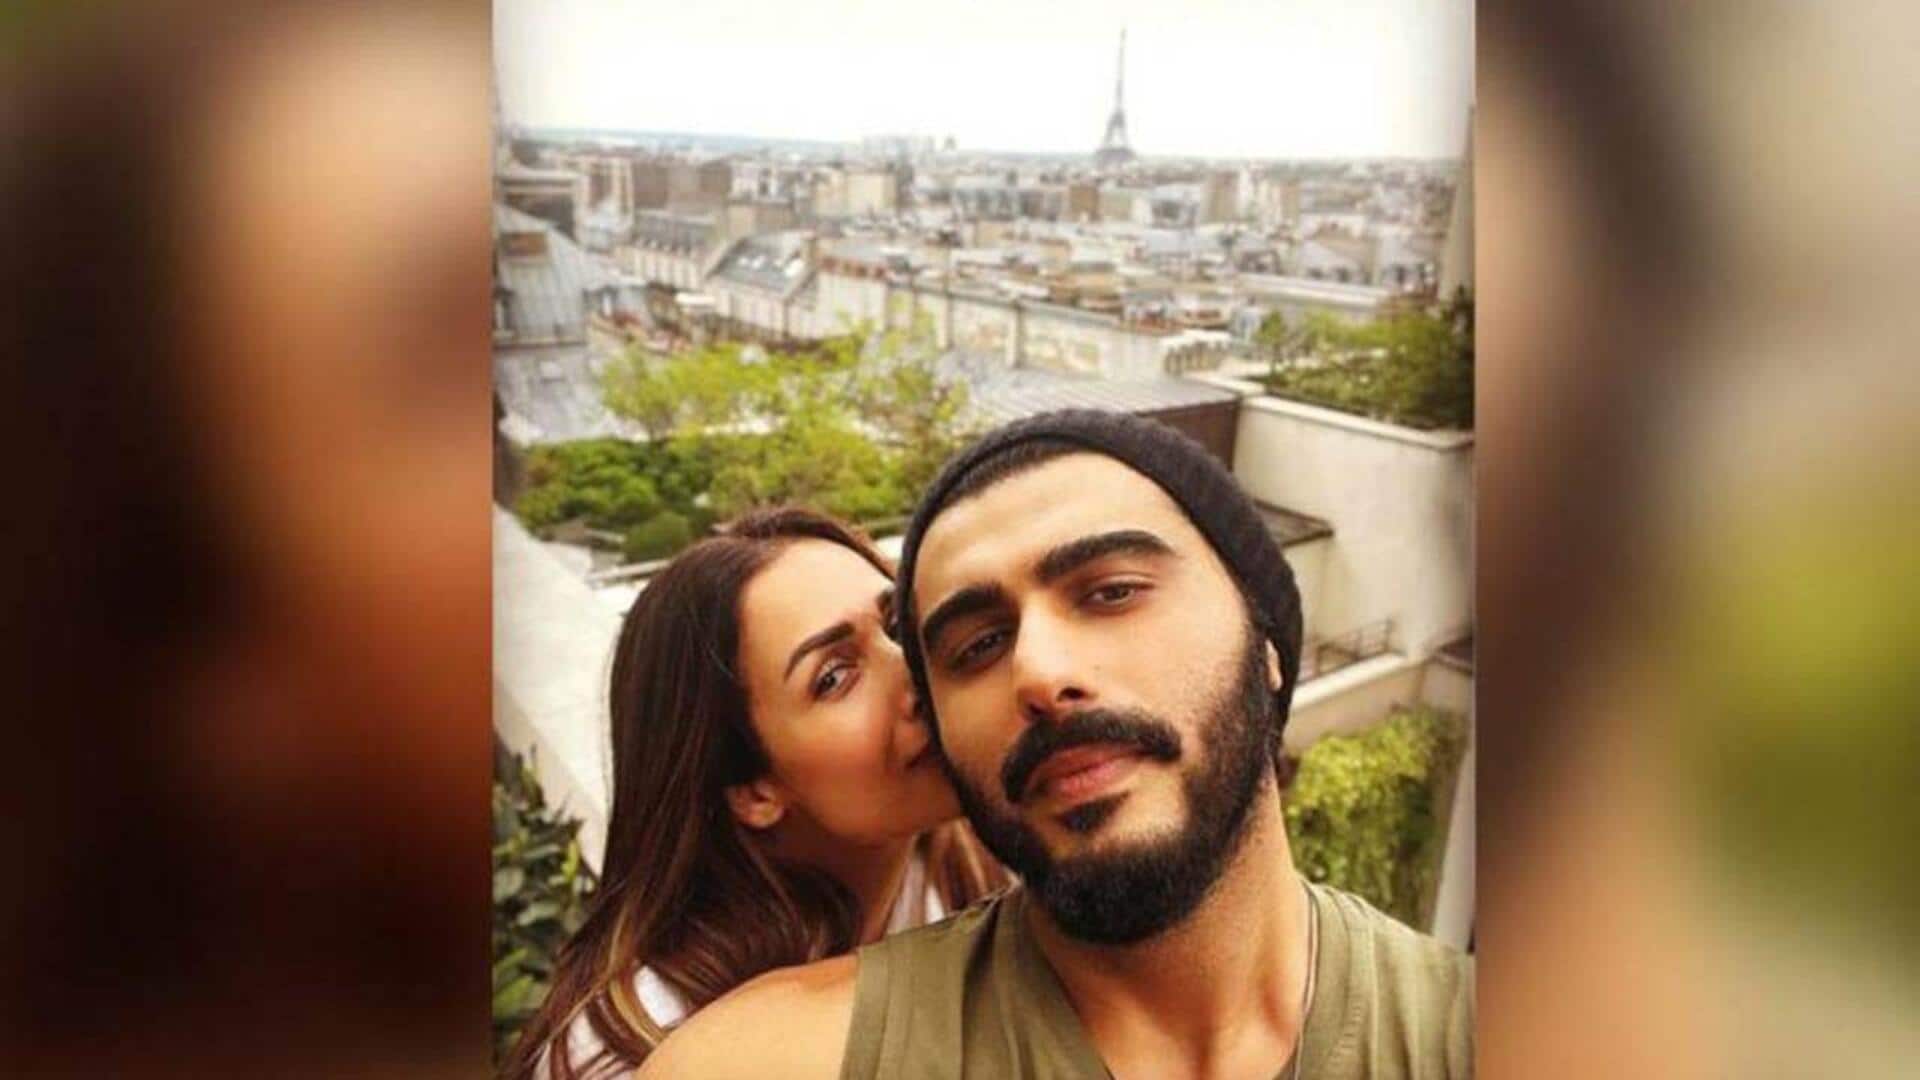 Malaika Arora and Arjun Kapoor still together, confirms her manager